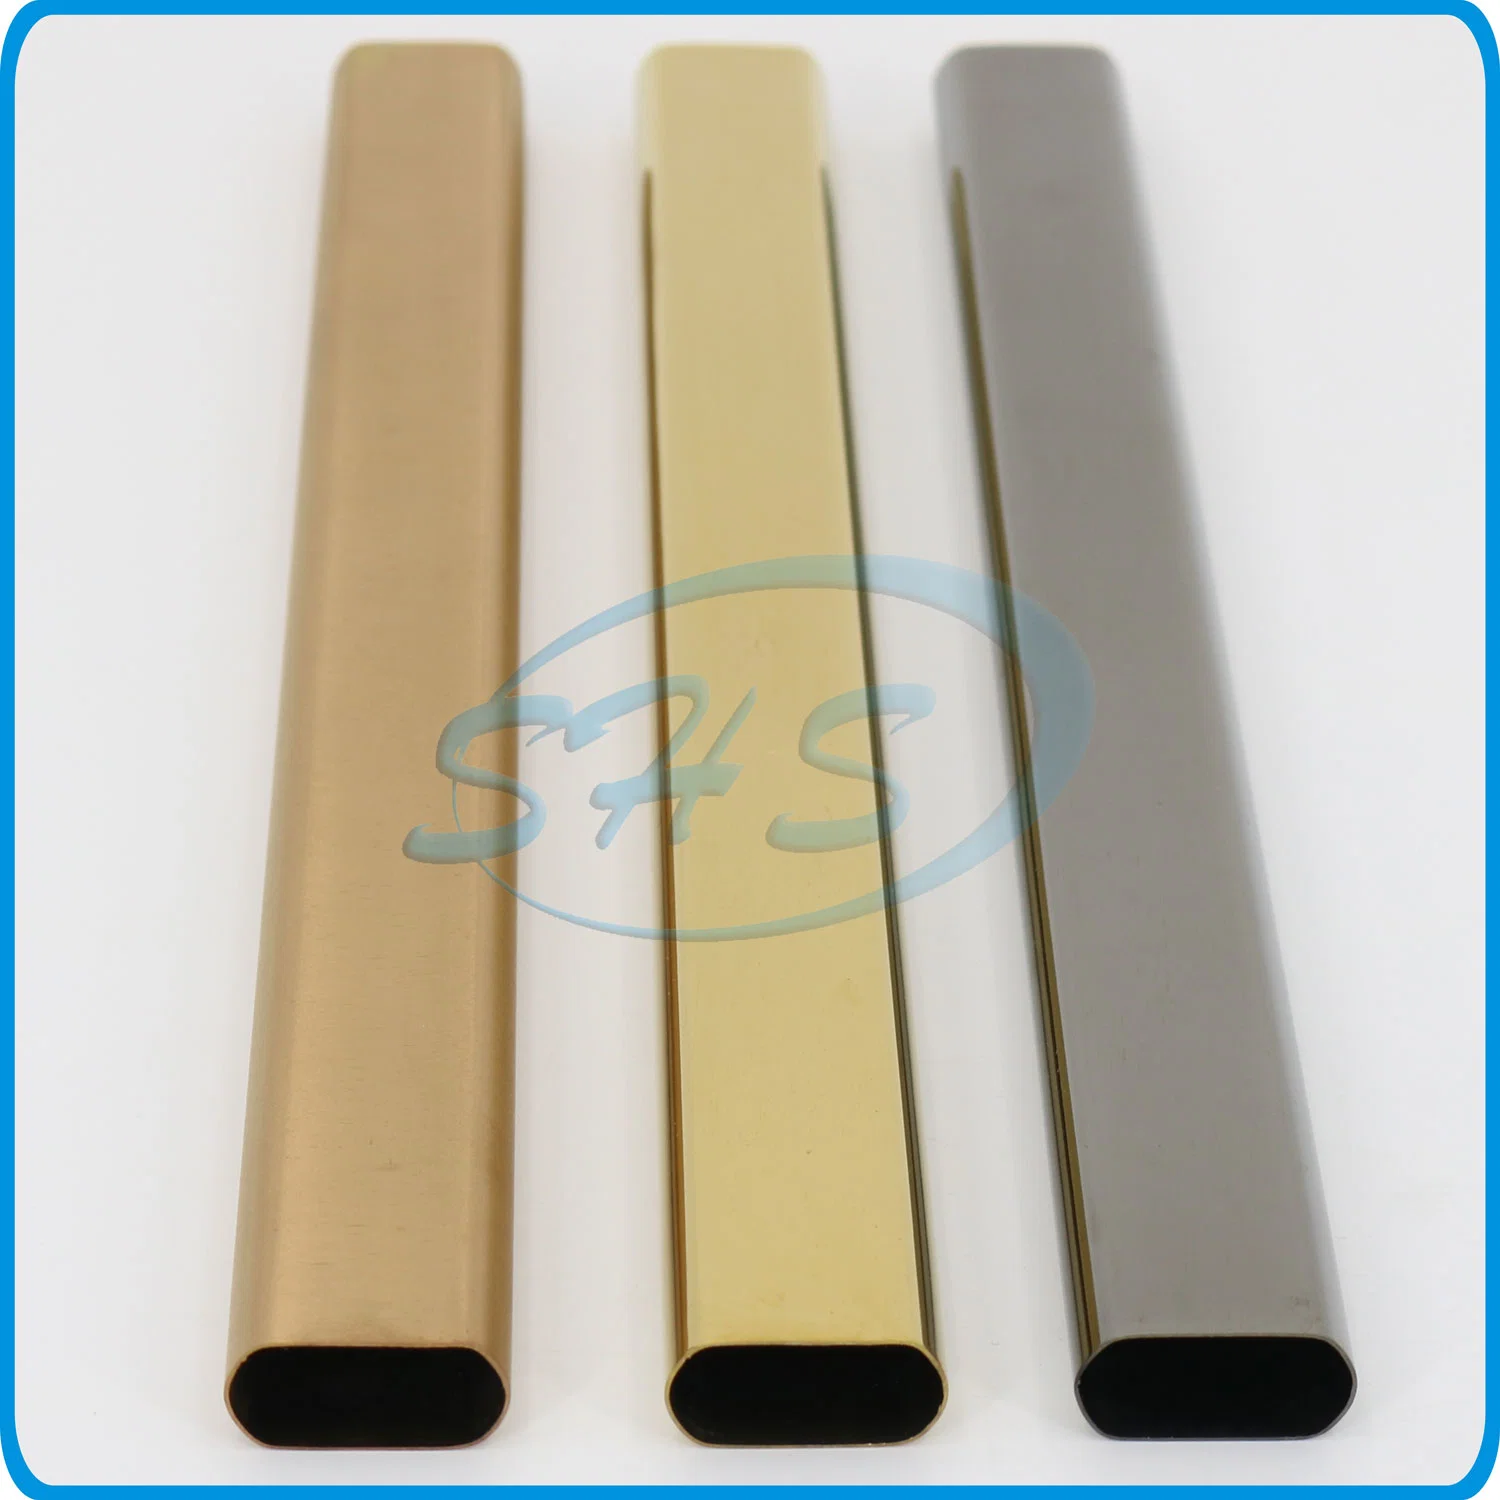 Colored Stainless Steel Pipes (Tubes) for Windows and Doors